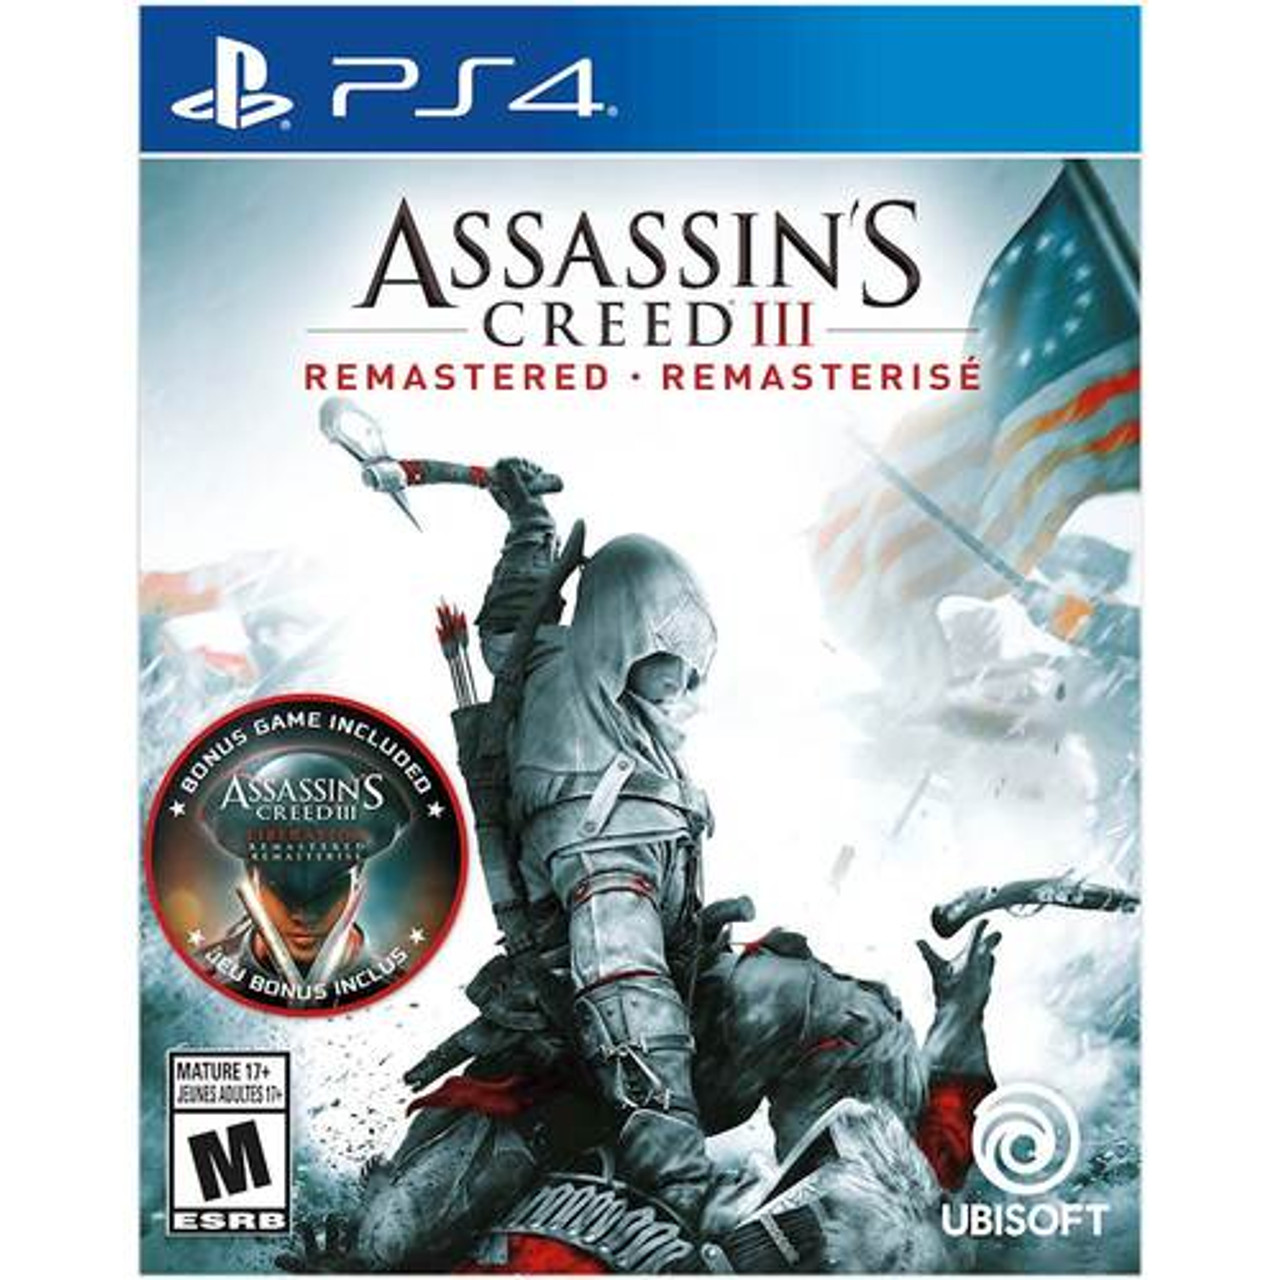 Assassin's Creed III Remastered Remastered Edition - PlayStation 4